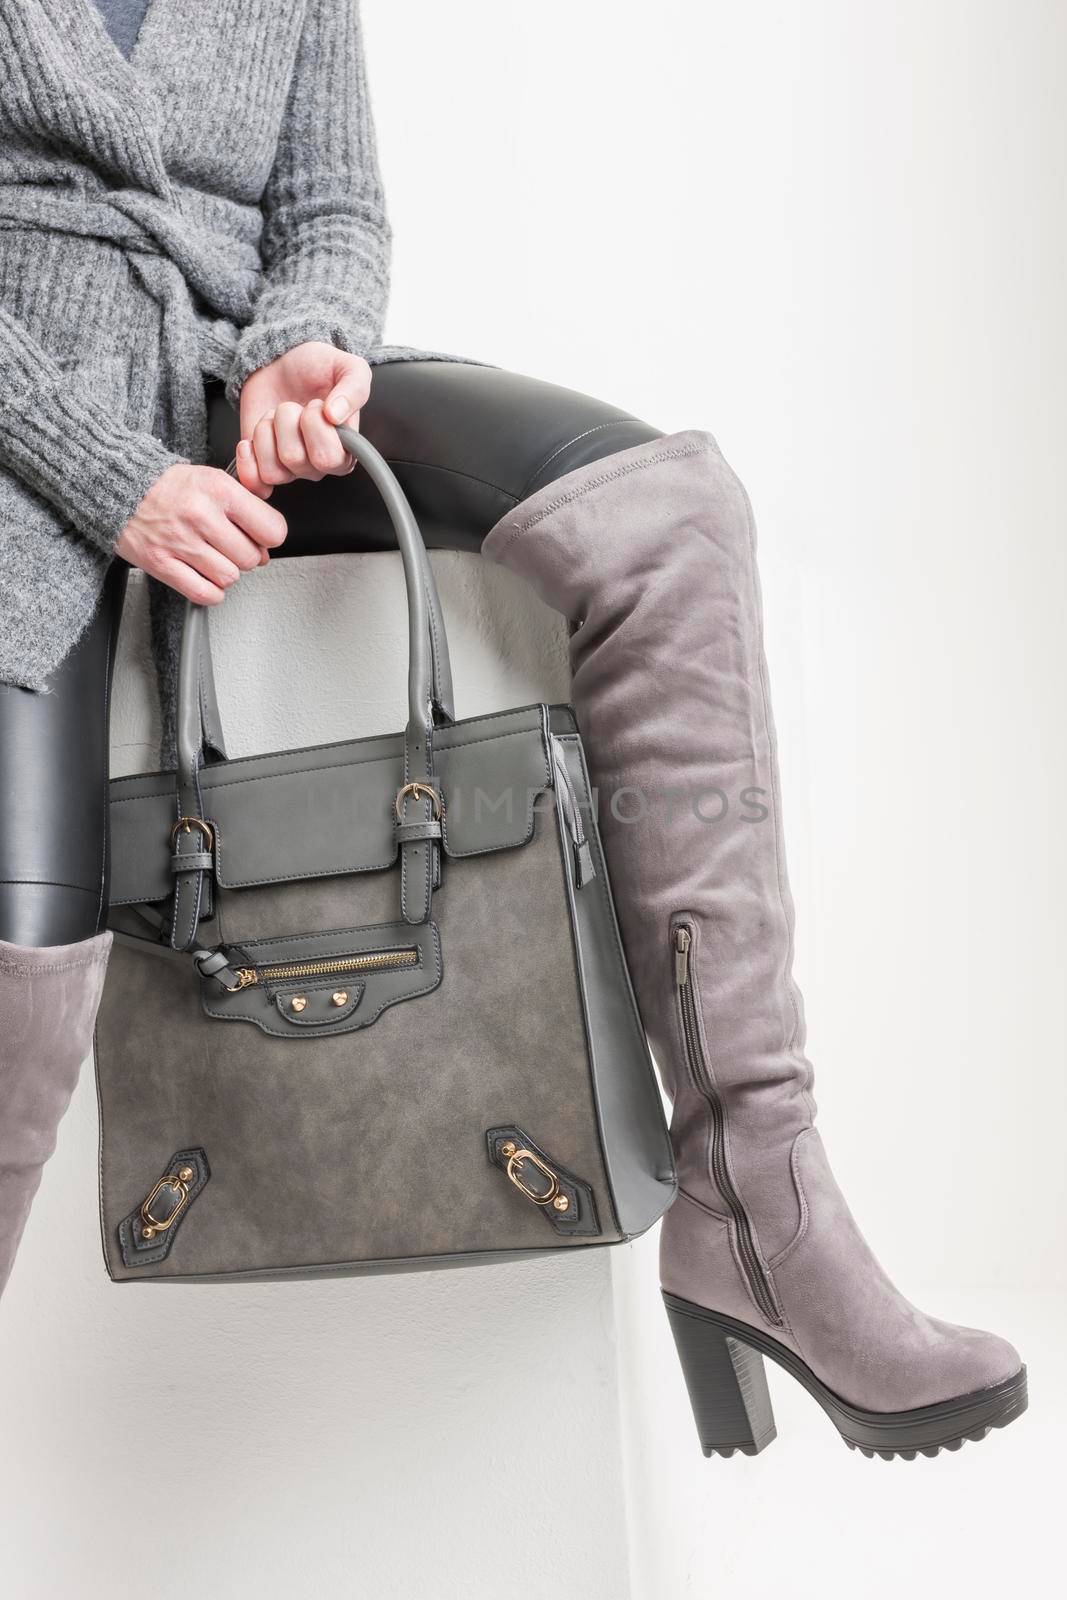 gray women's boots with a handbag by phbcz